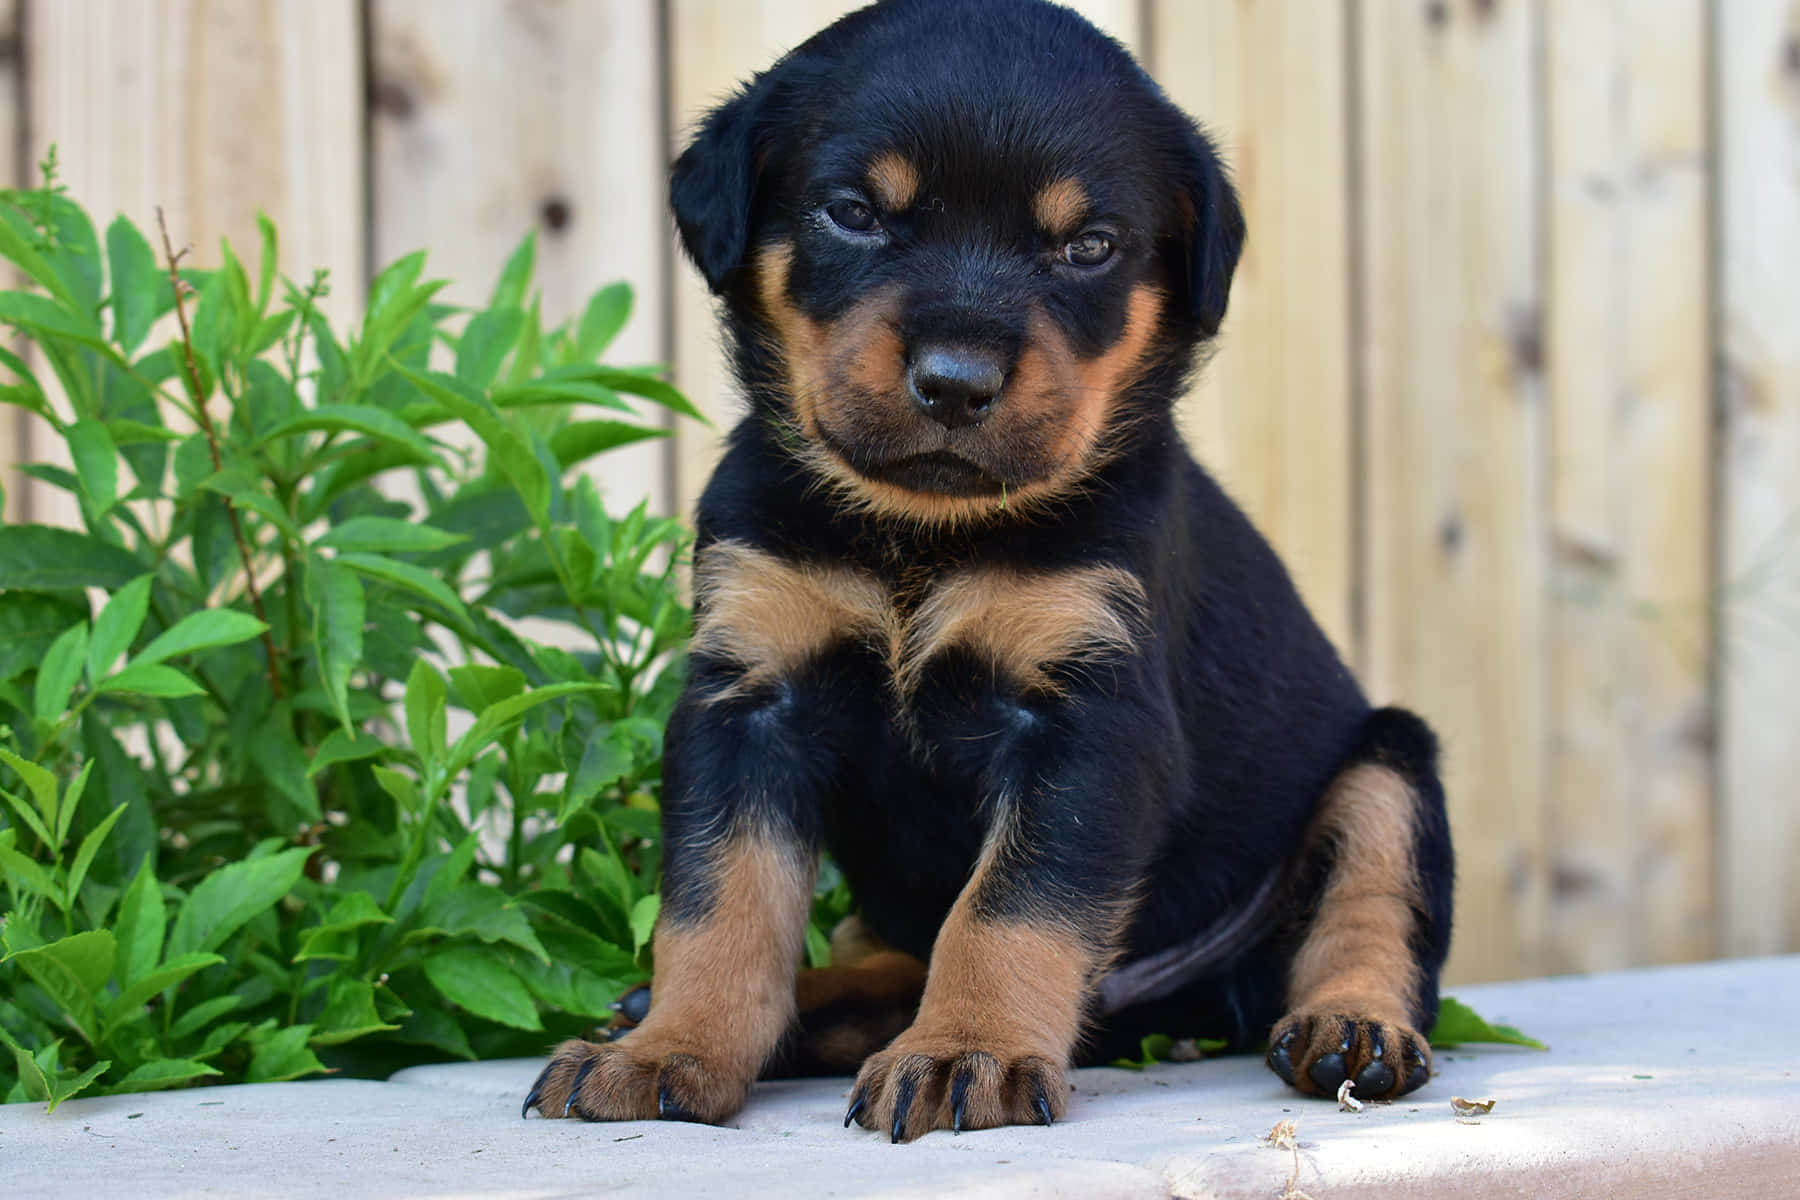 cute baby rottweiler puppies